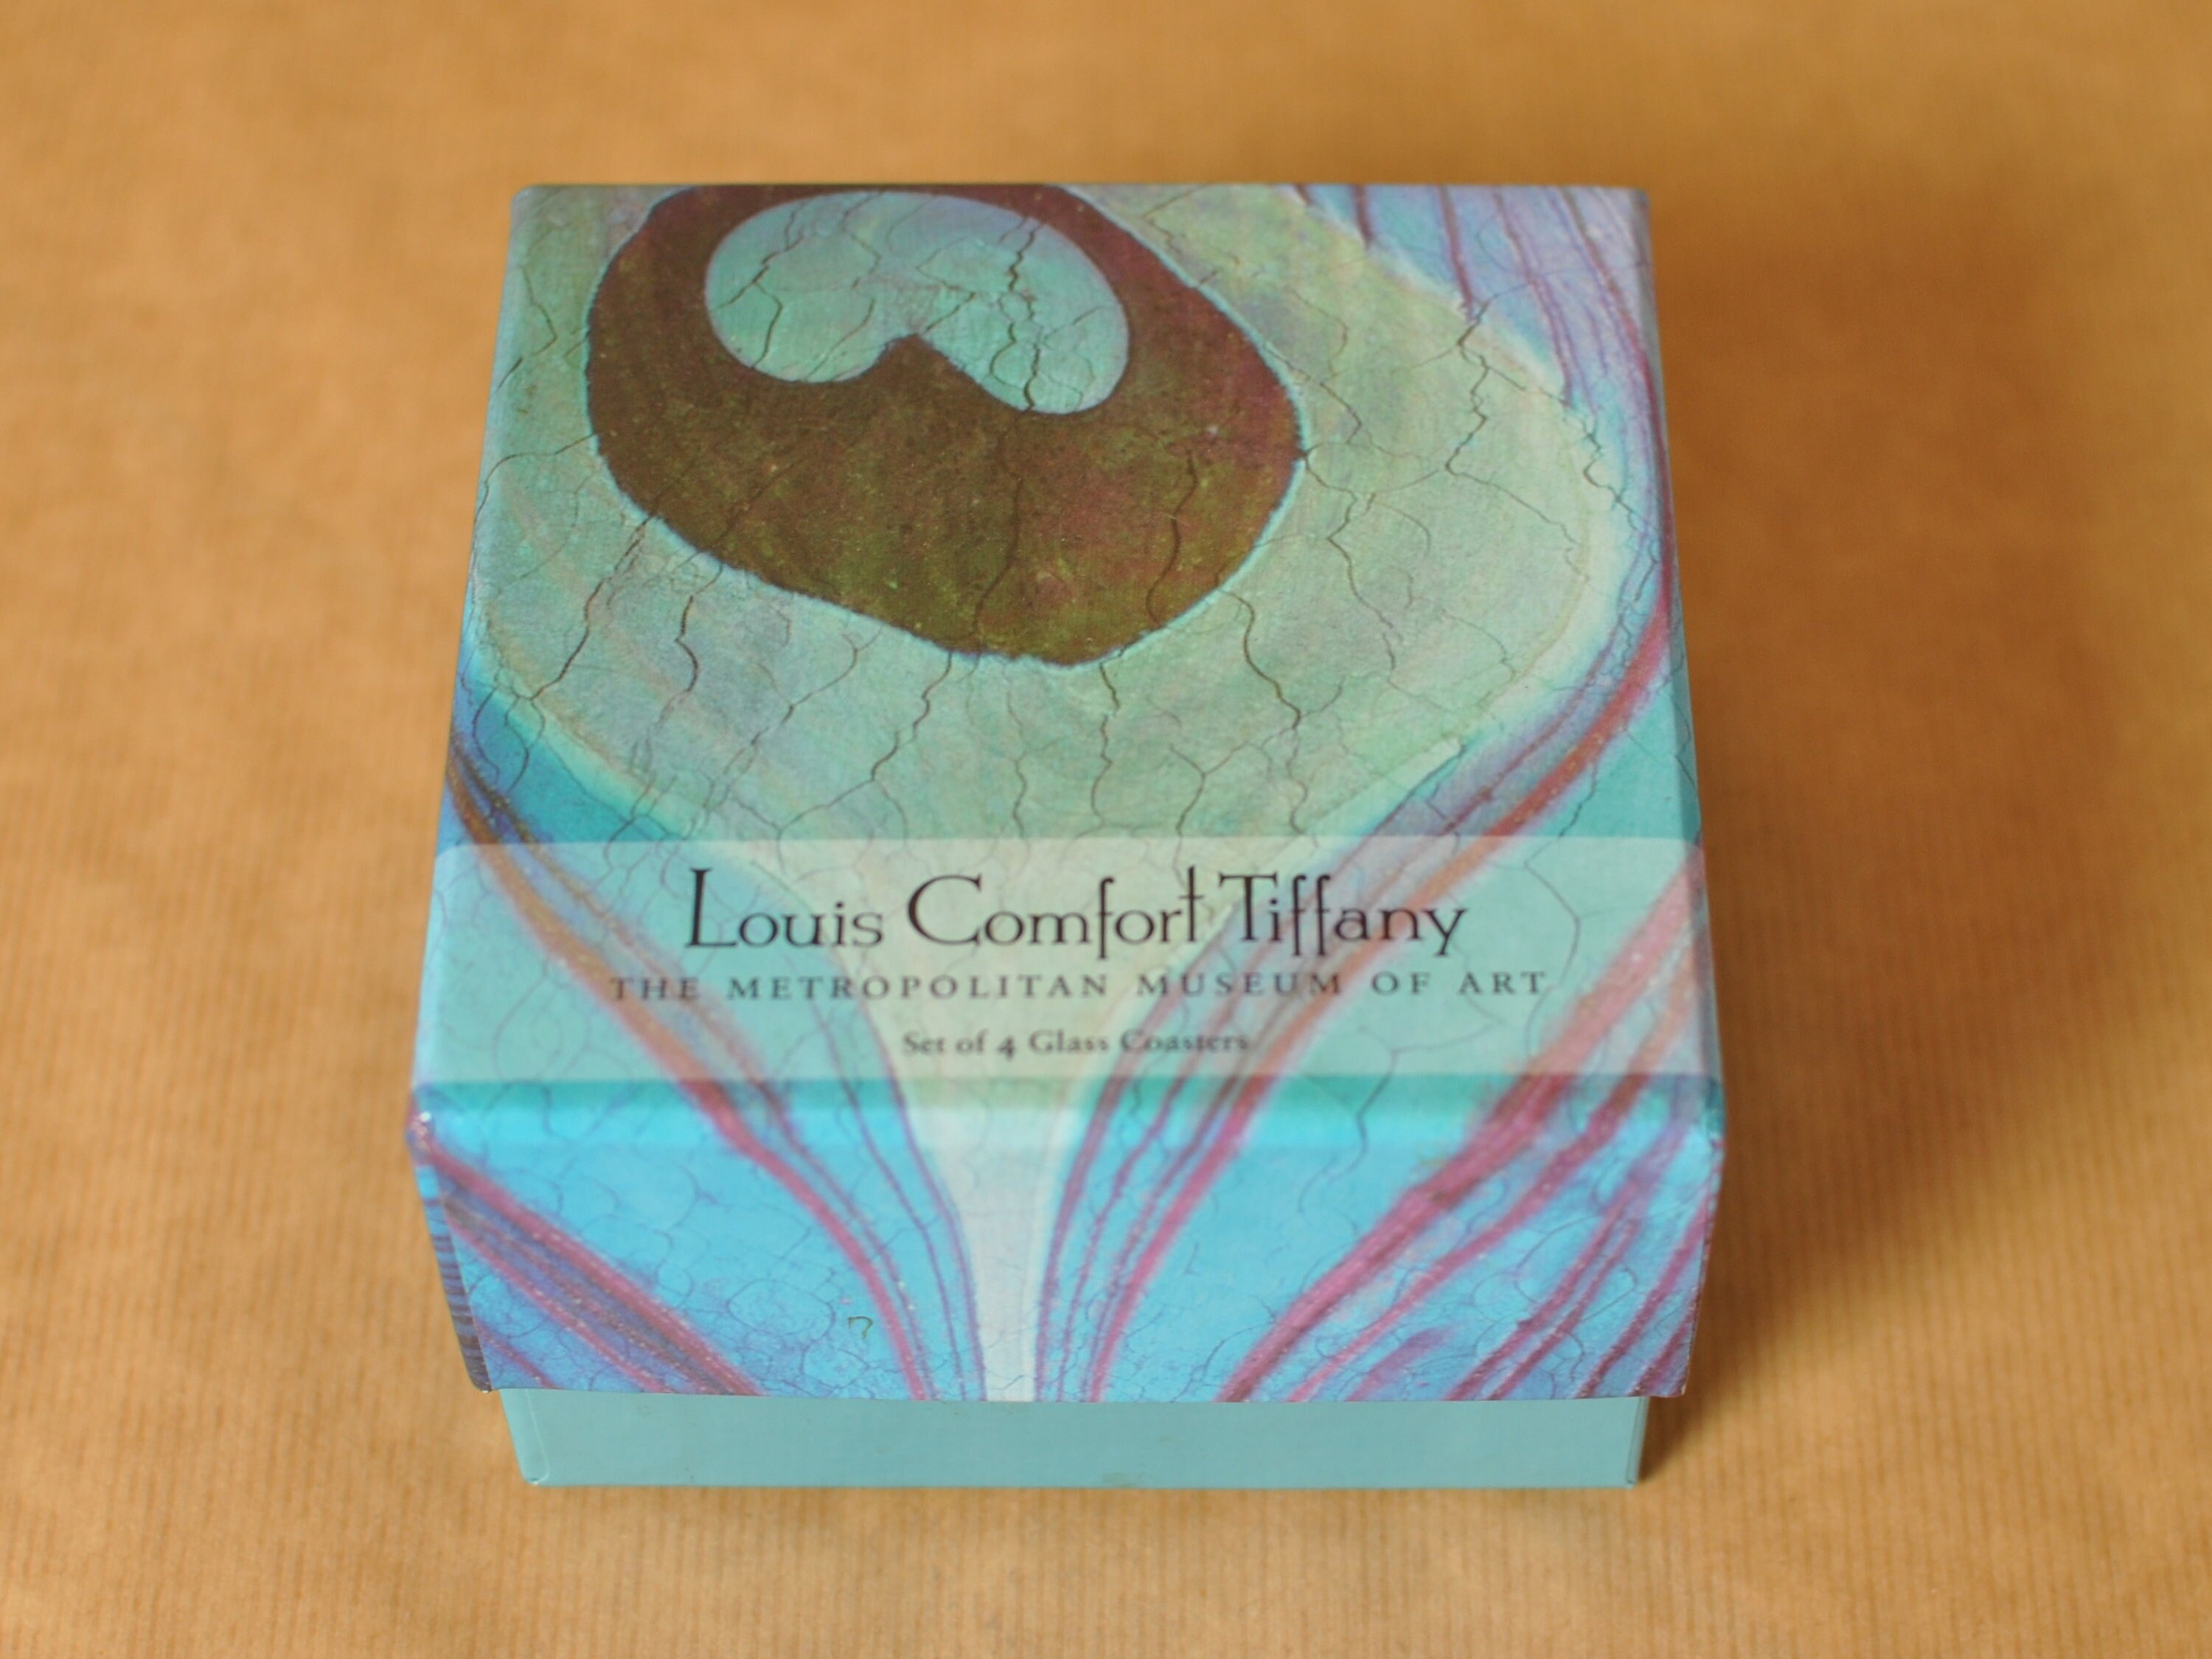 Louis C. Tiffany Stained-Glass Coasters